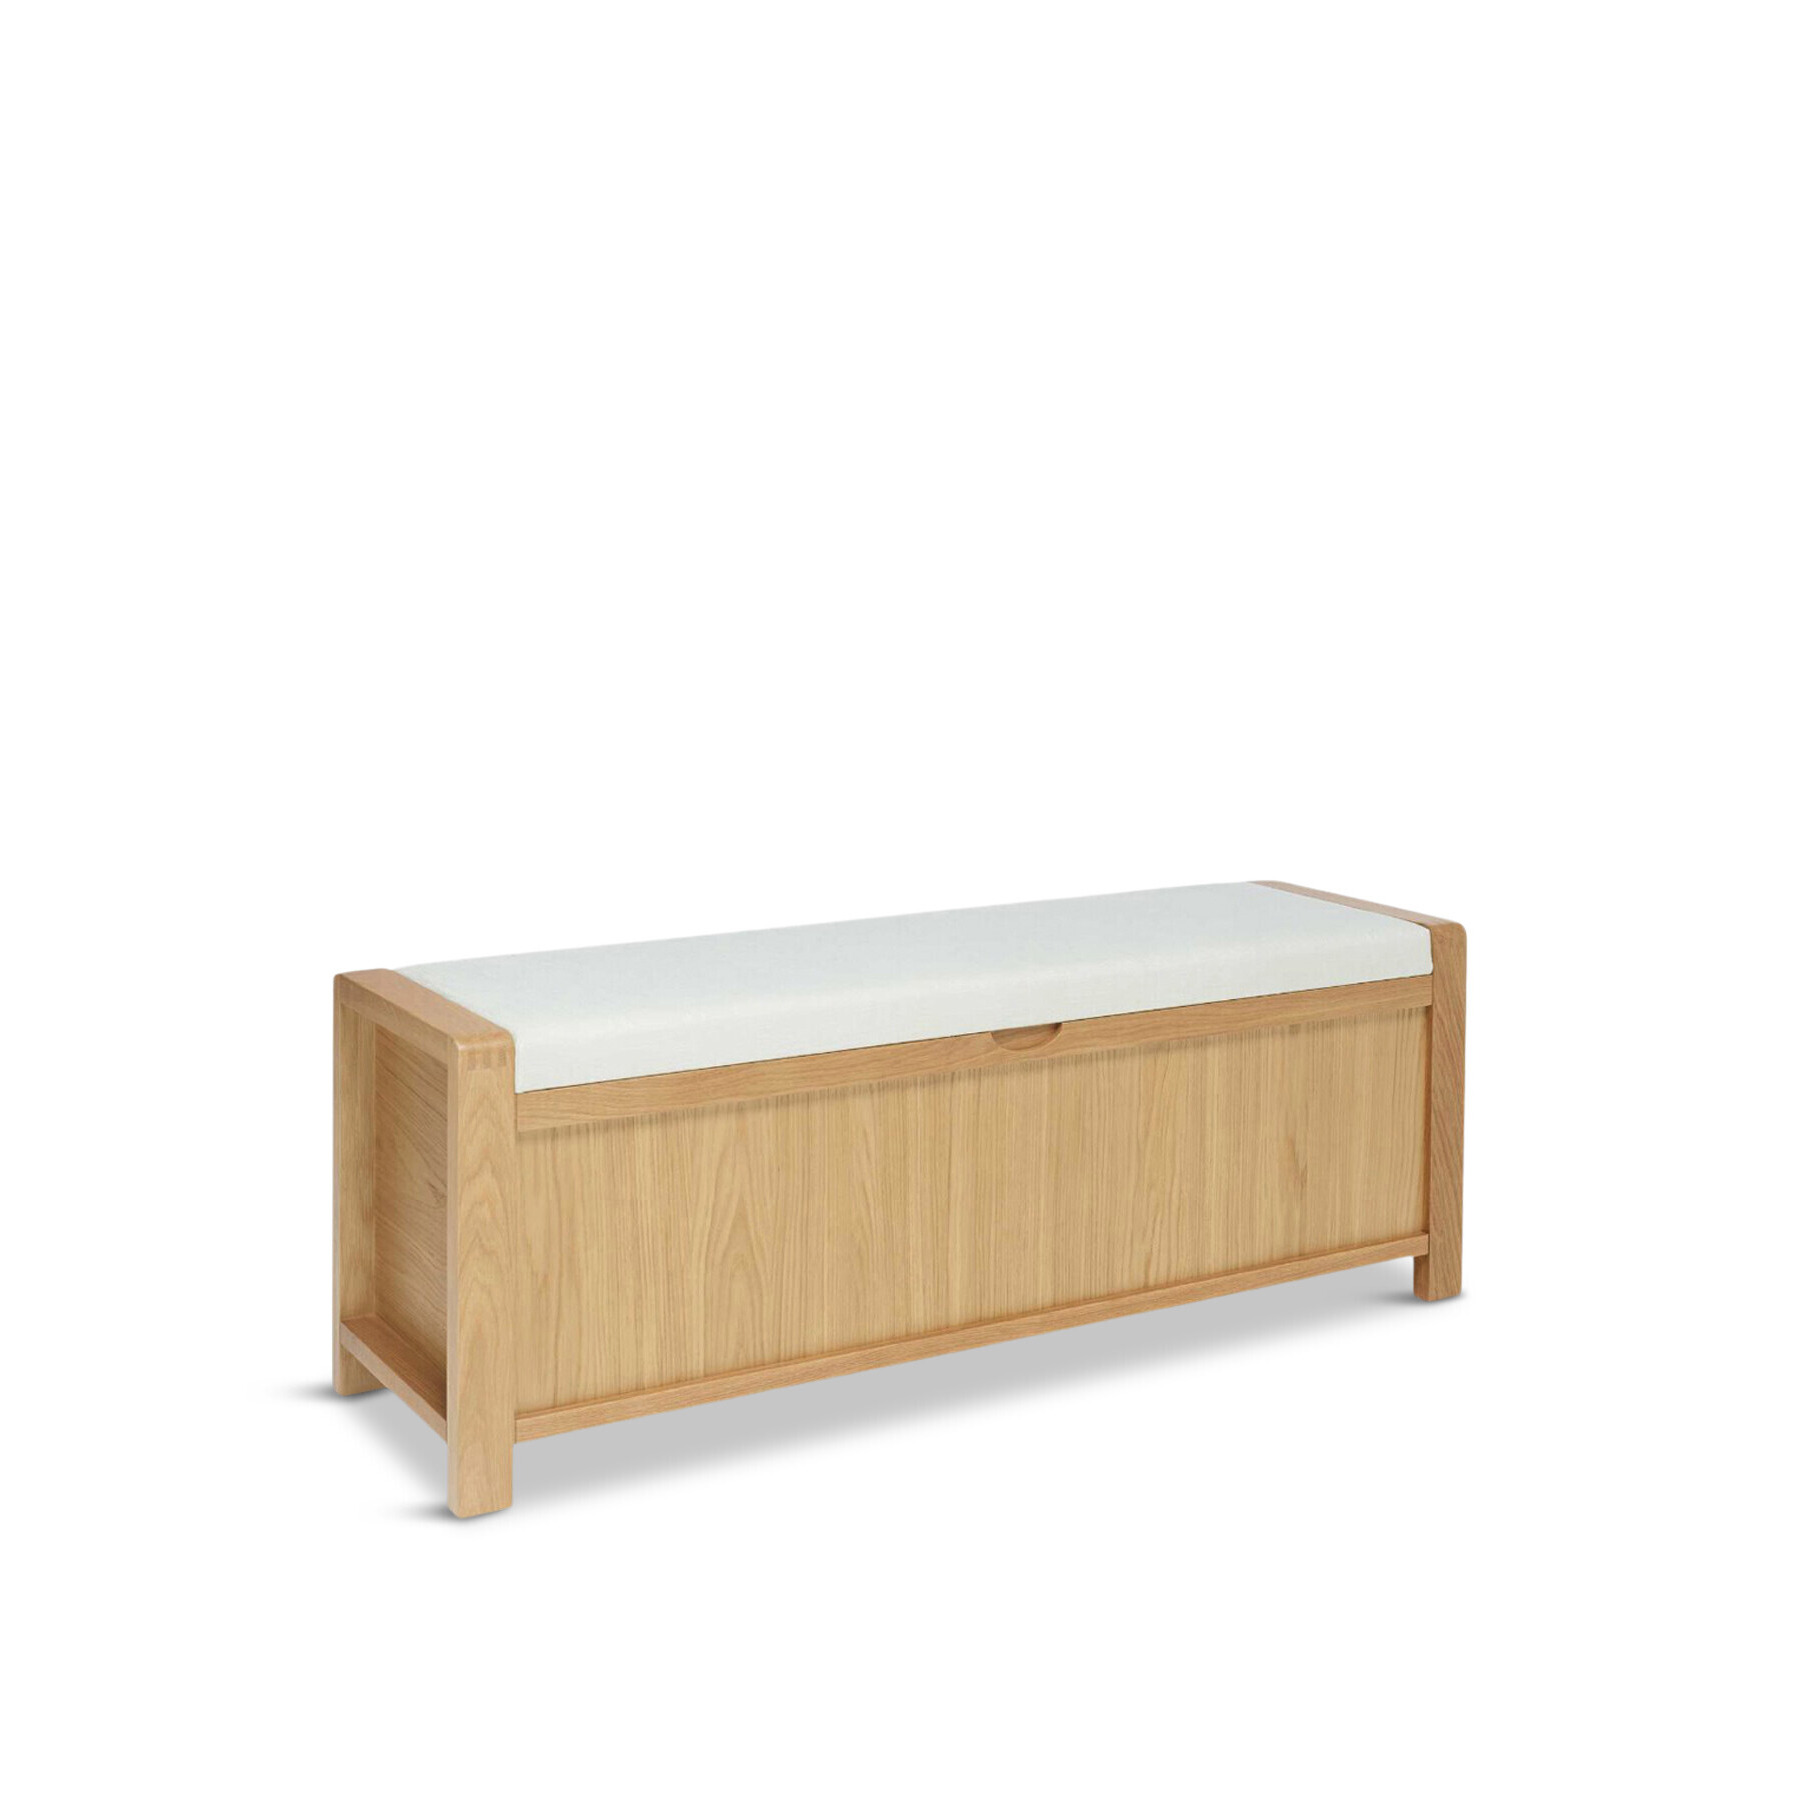 Barker and Stonehouse Ercol Bosco Storage Bench Neutral - image 1